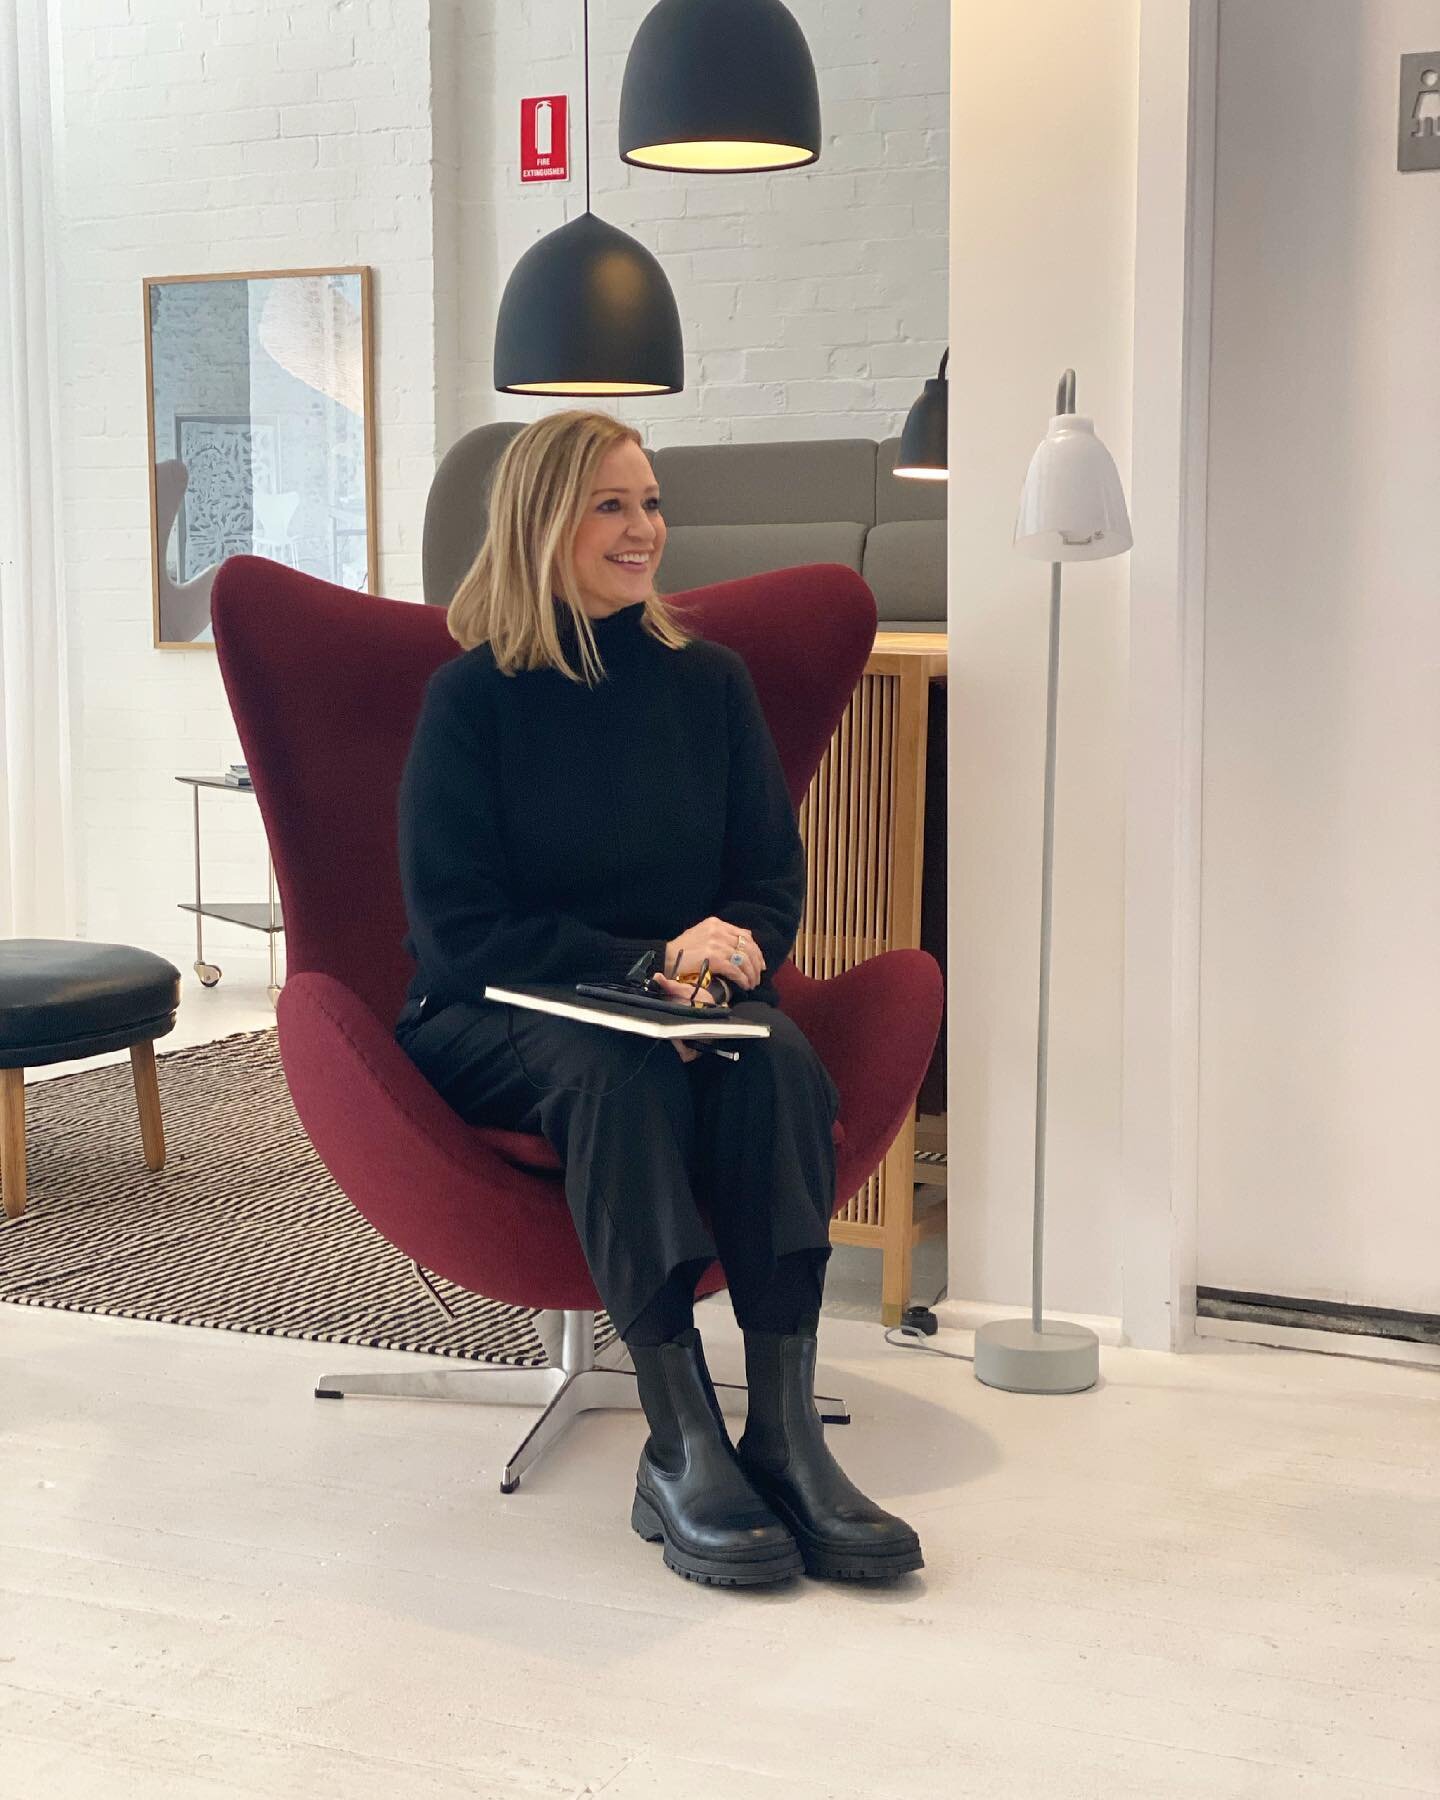 Another day &hellip; another chair! Discussing #designvalues at our @futurespacedesign inaugural #designday We all shared our favourite designed object and why - mine has been the @arnejacobsenofficial #eggchair for as long as I can remember. For me 